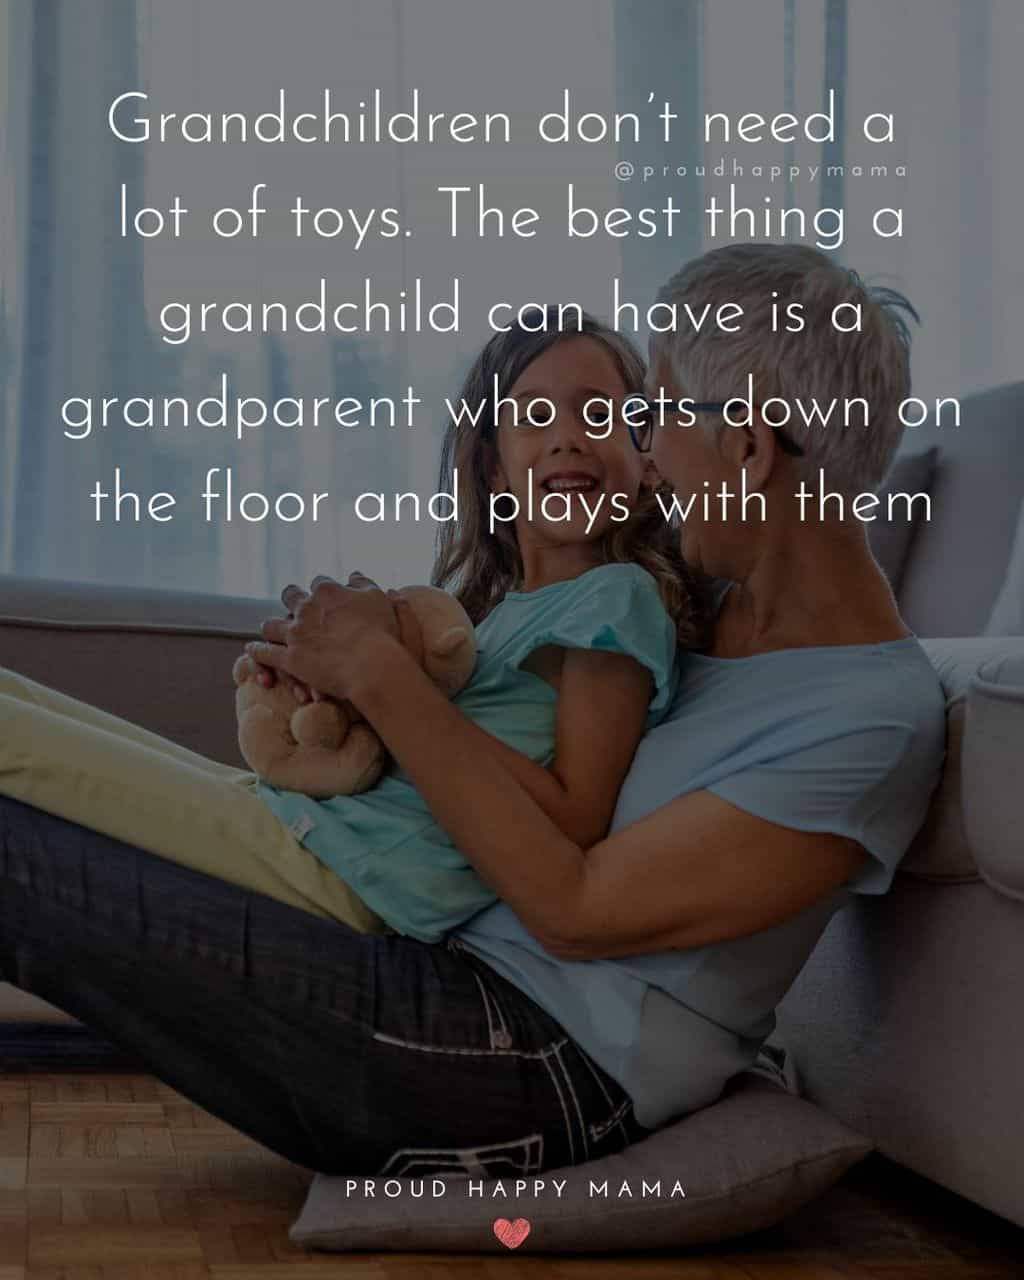 Grandparent Quotes – Grandchildren don’t need a lot of toys. The best thing a grandchild can have is a grandparent who gets